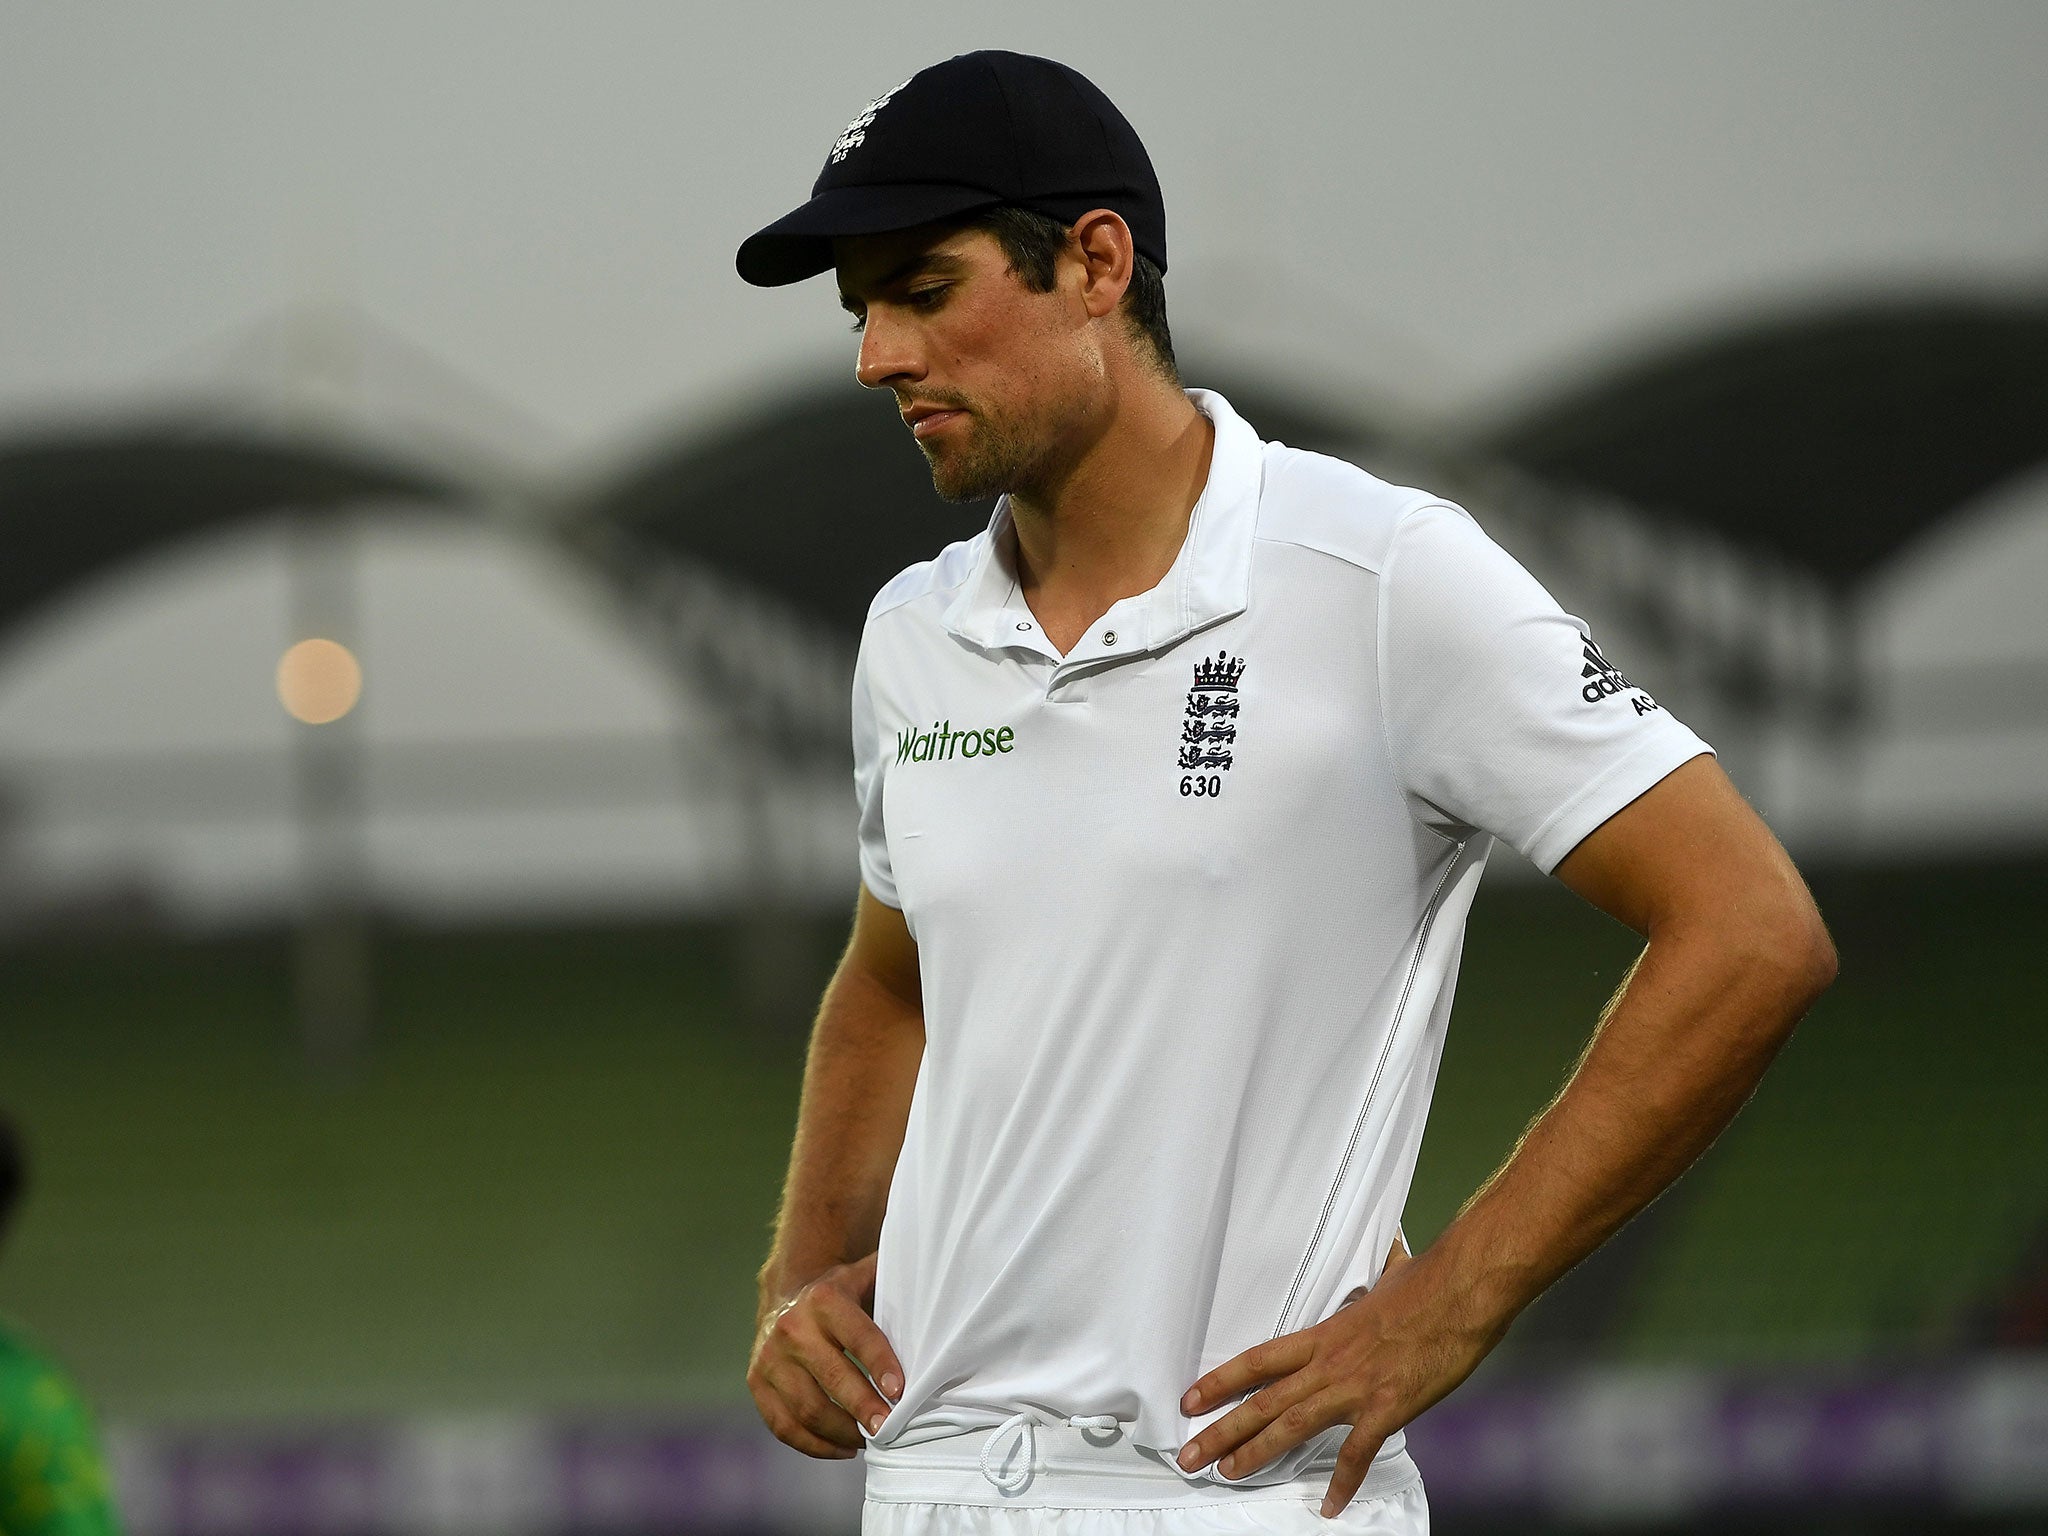 Speaking after defeat in the fifth Test, Cook confirmed he is now seriously considering his position after more than four years leading the side